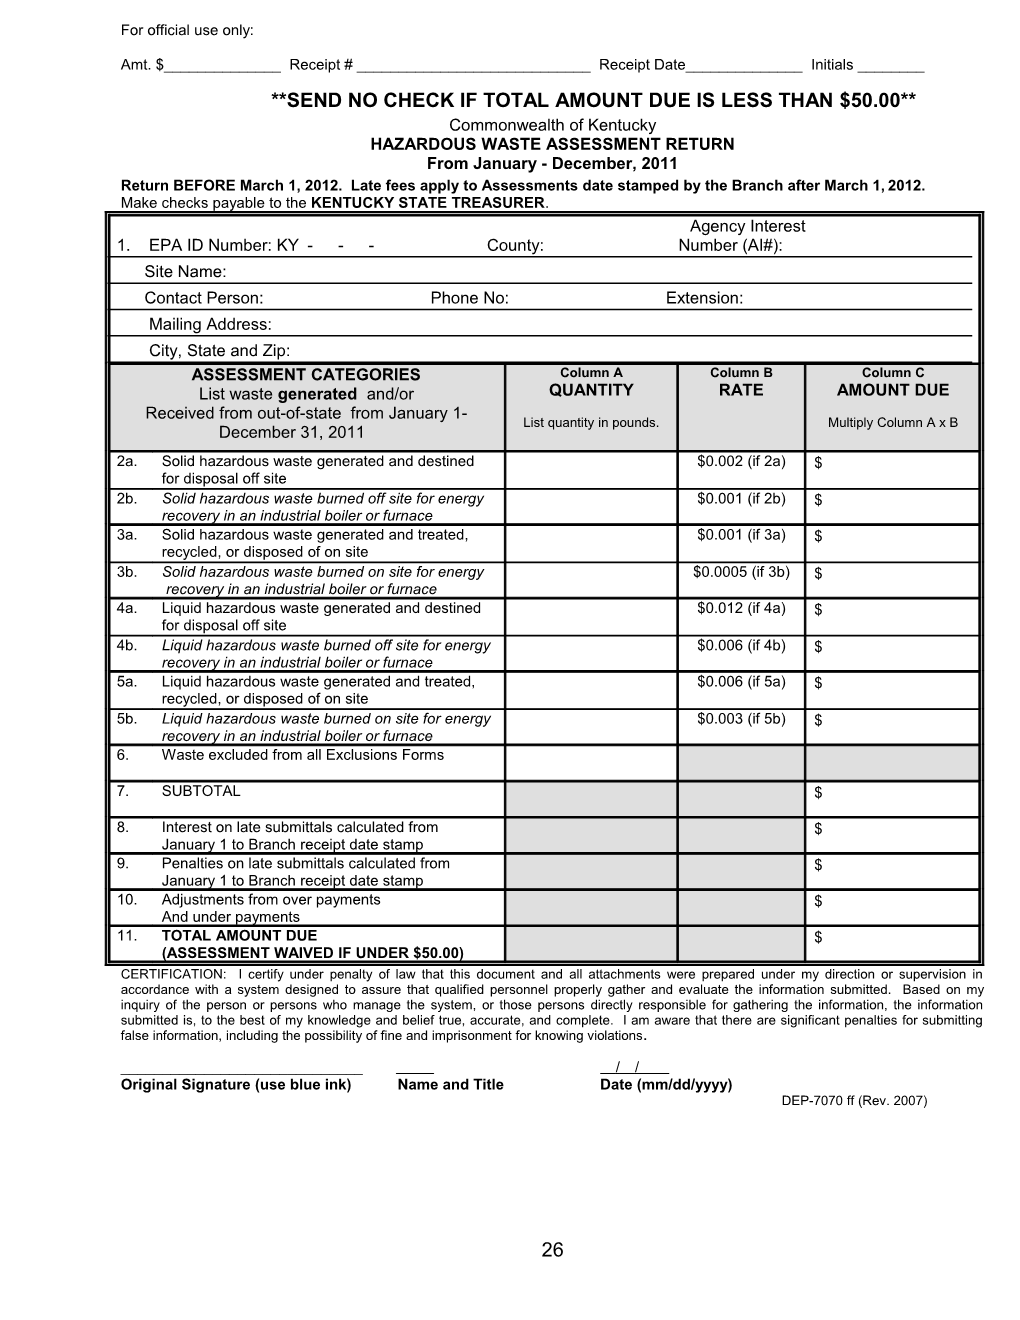 Page 26 - DEP7070 Assessment Return Fill in Format